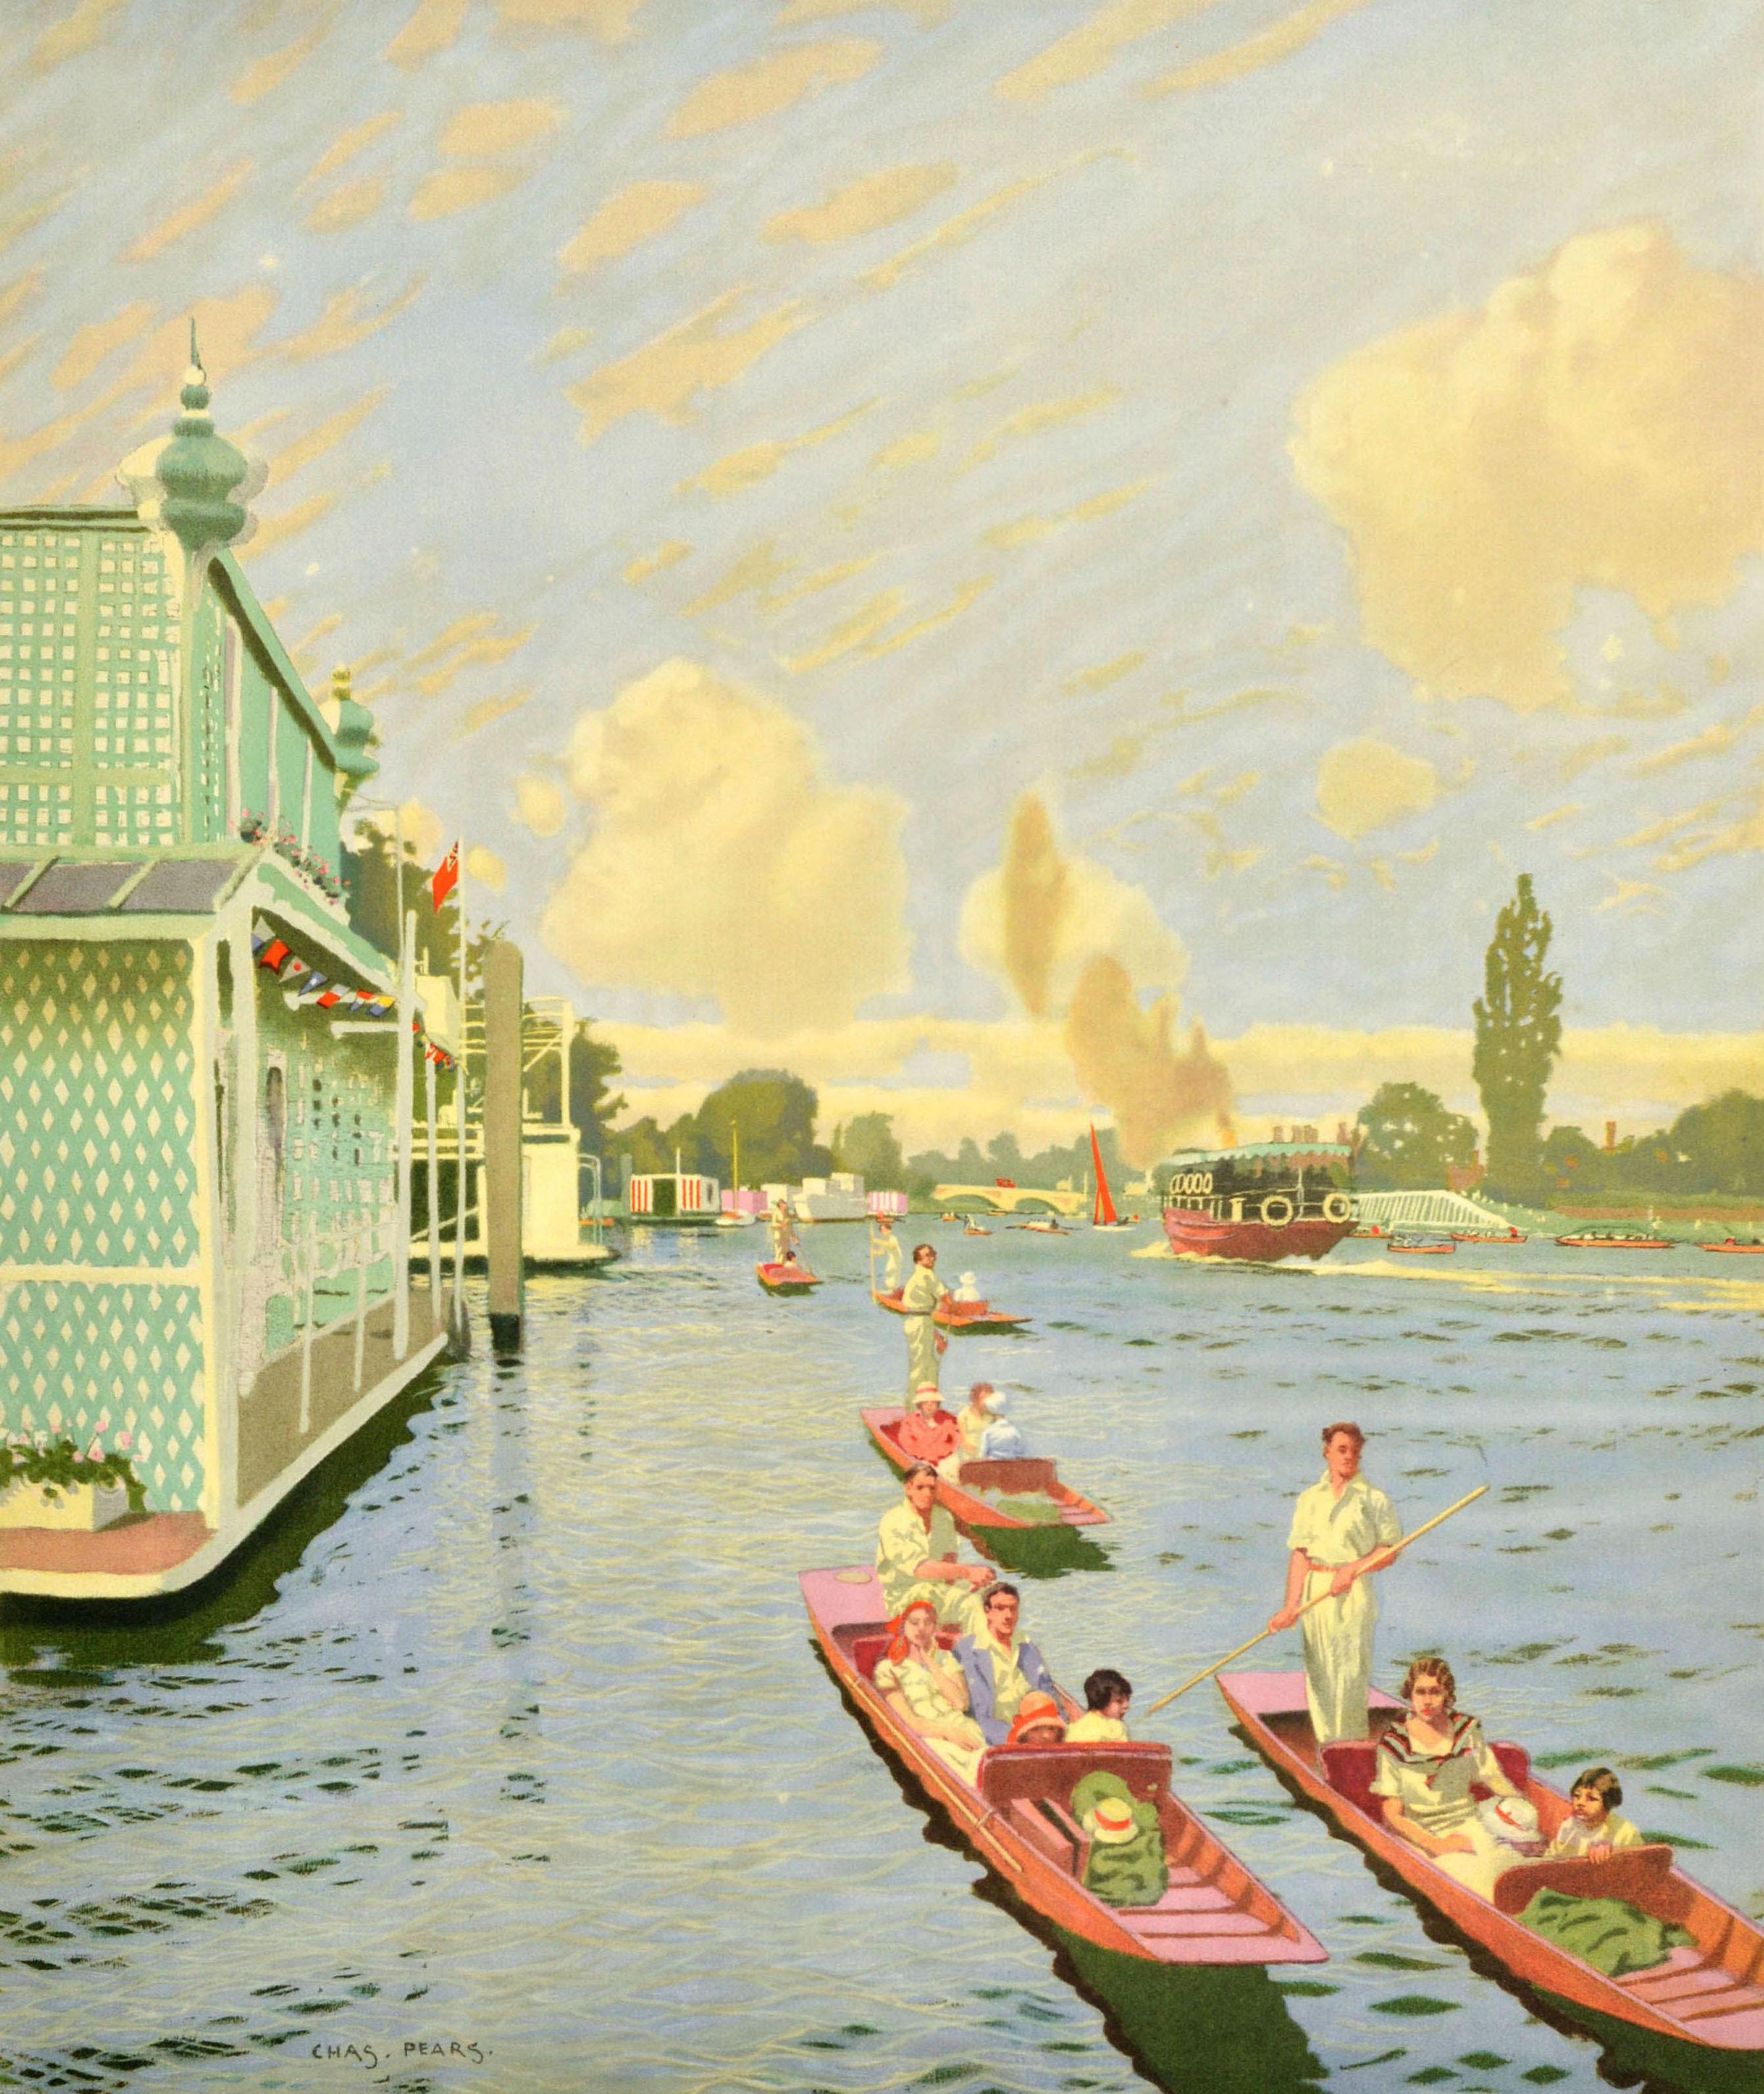 Original vintage London Transport travel advertising poster for Walton Twickenham Windsor featuring a great illustration by the British painter Charles Pears (1873-1958) showing people in summer white clothing punting on boats along the River Thames